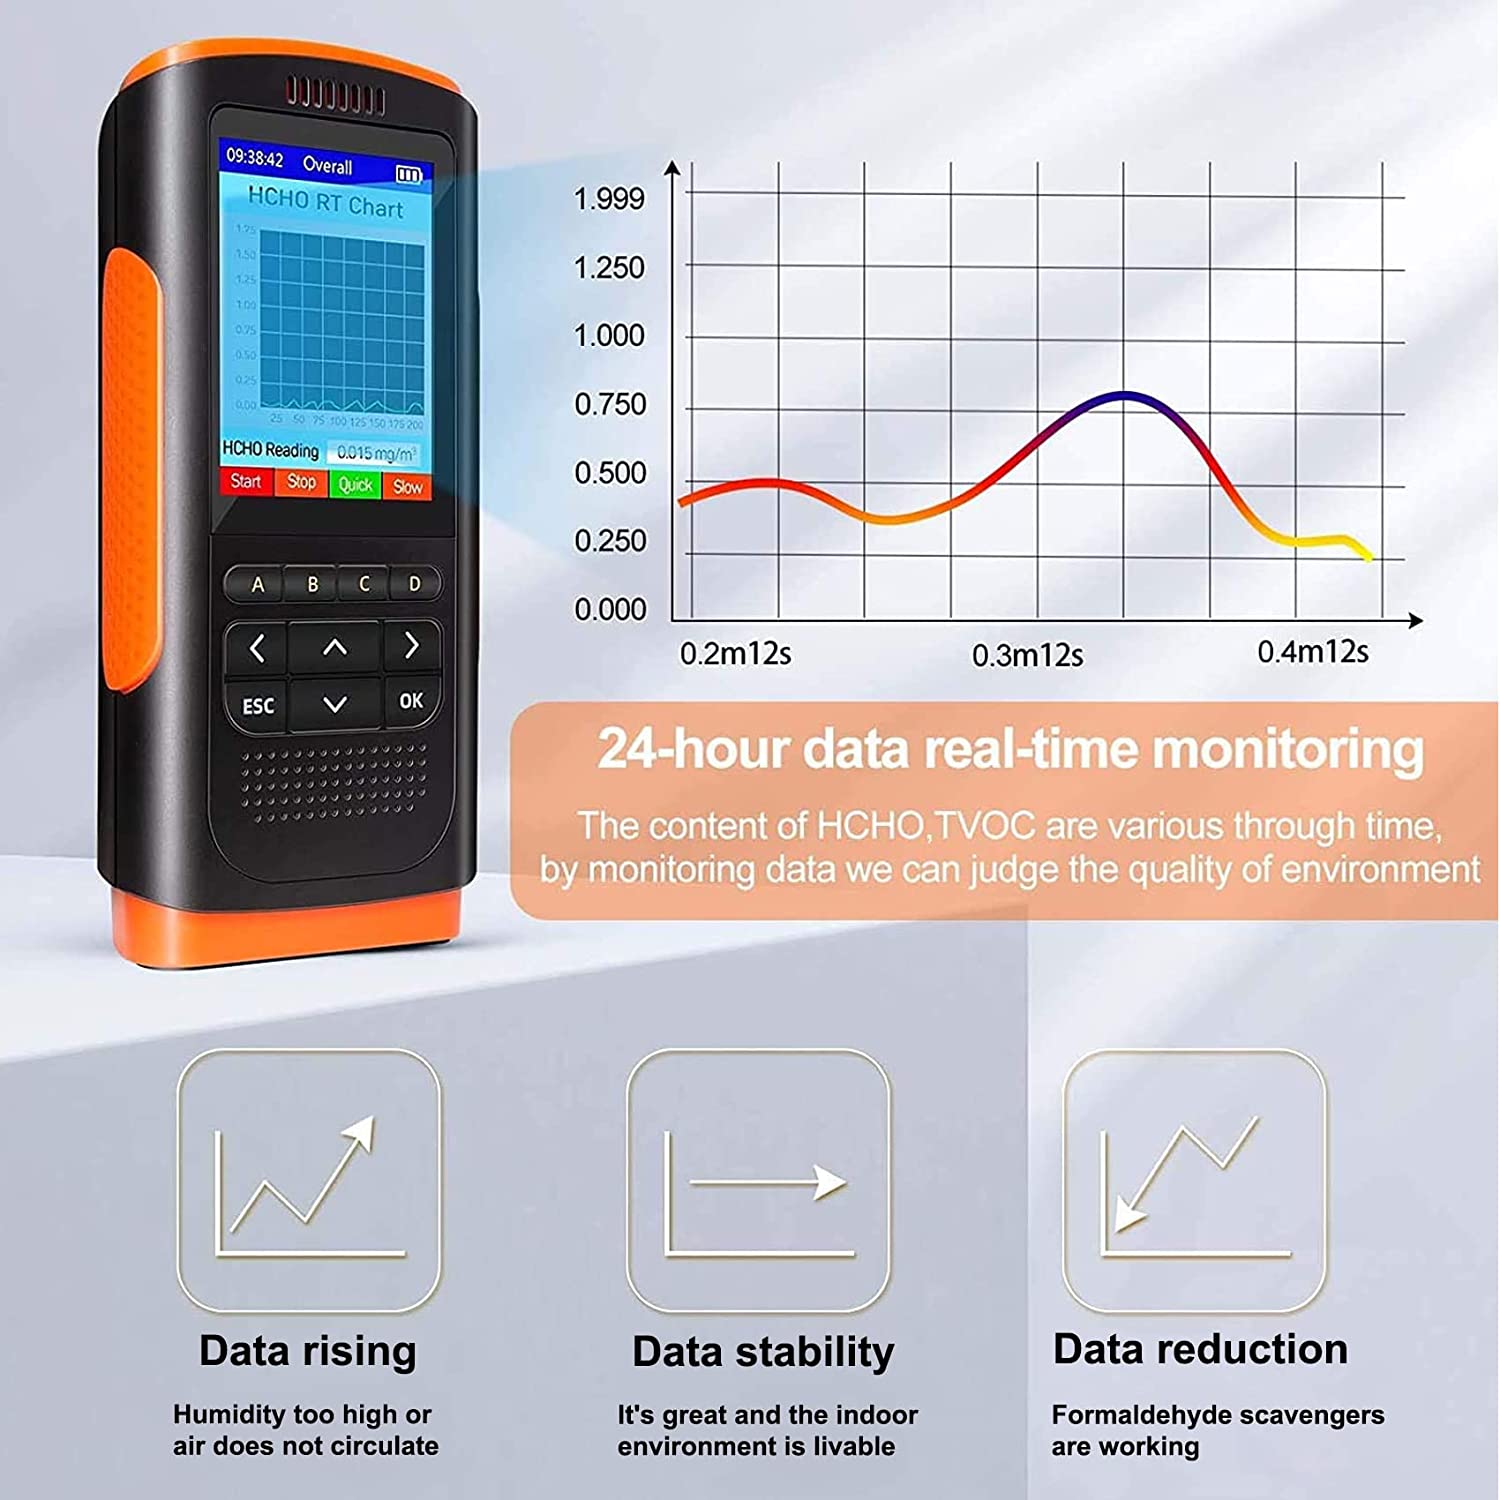 Air Quality Monitor, Indoor Air Quality Pollution Detector Accurate Tester for HCHO (Formaldehyde) TVOC PM2.5 PM1.0 PM10, with Temperature Humidity Monitoring 2